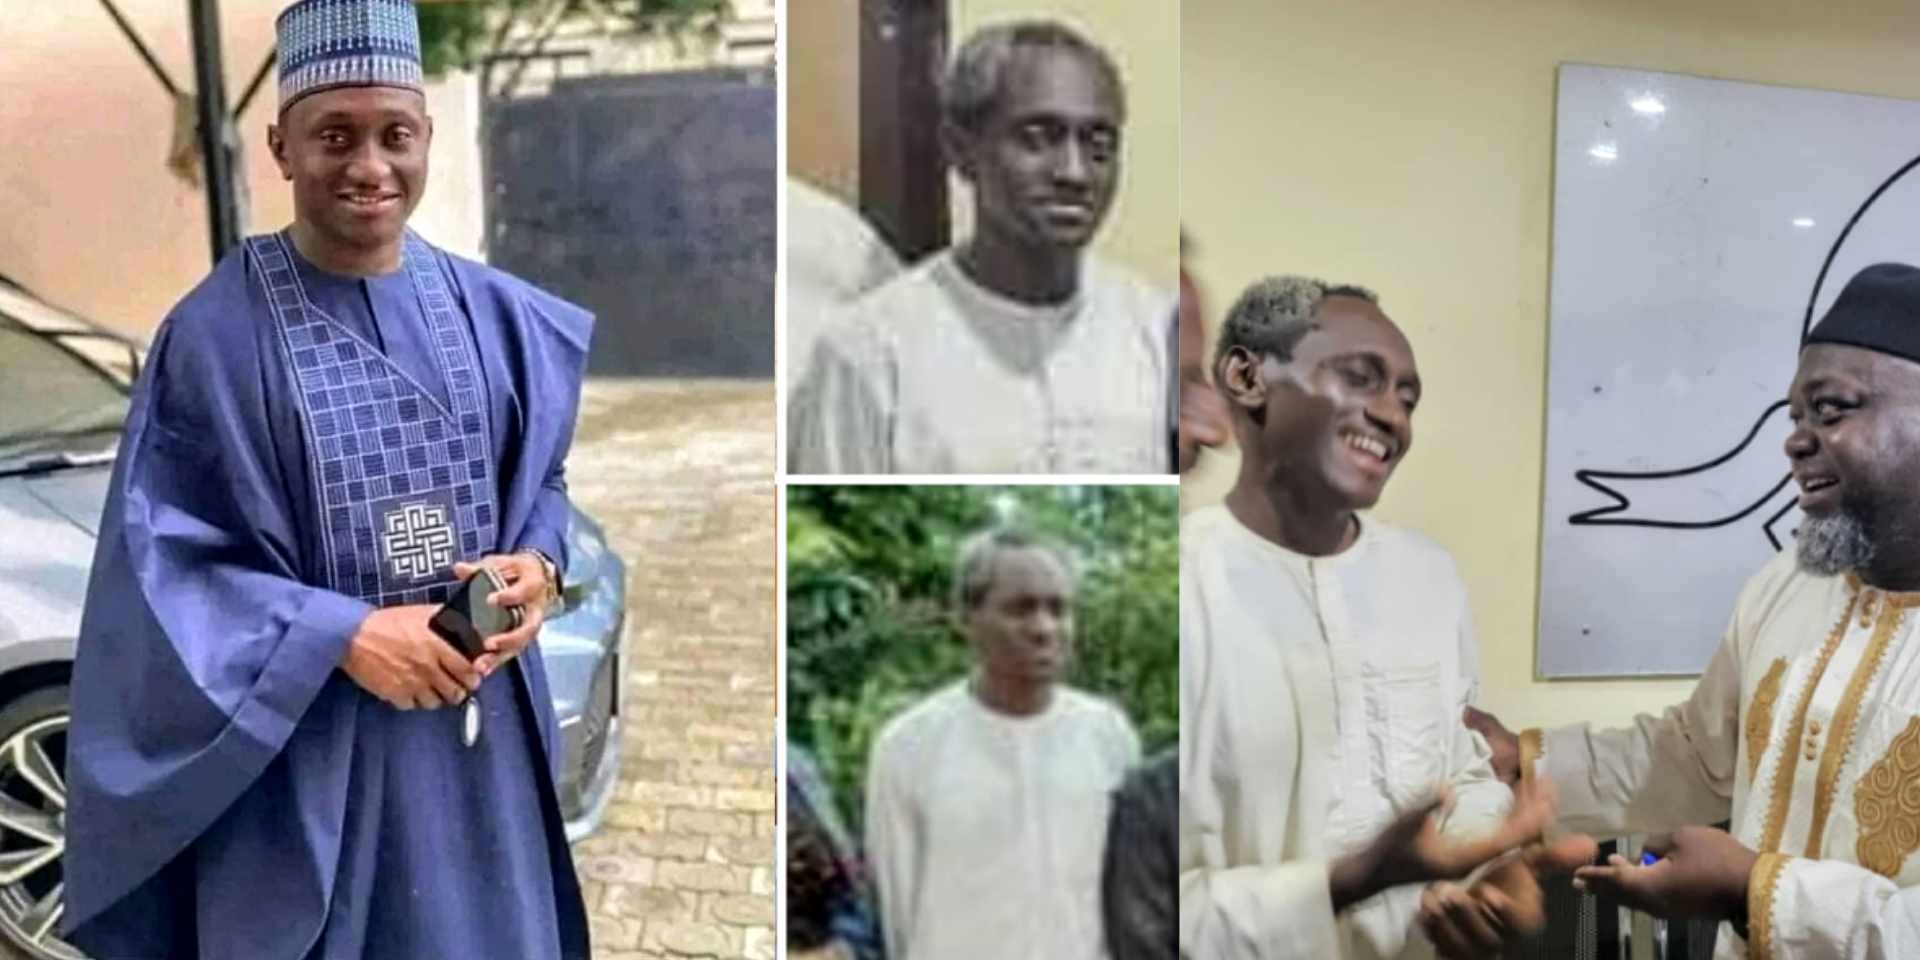 Kaduna Train Attack: Ango Abdullahi's Son, Sadiq rendered almost unrecognizable after spending 3 months in captivity